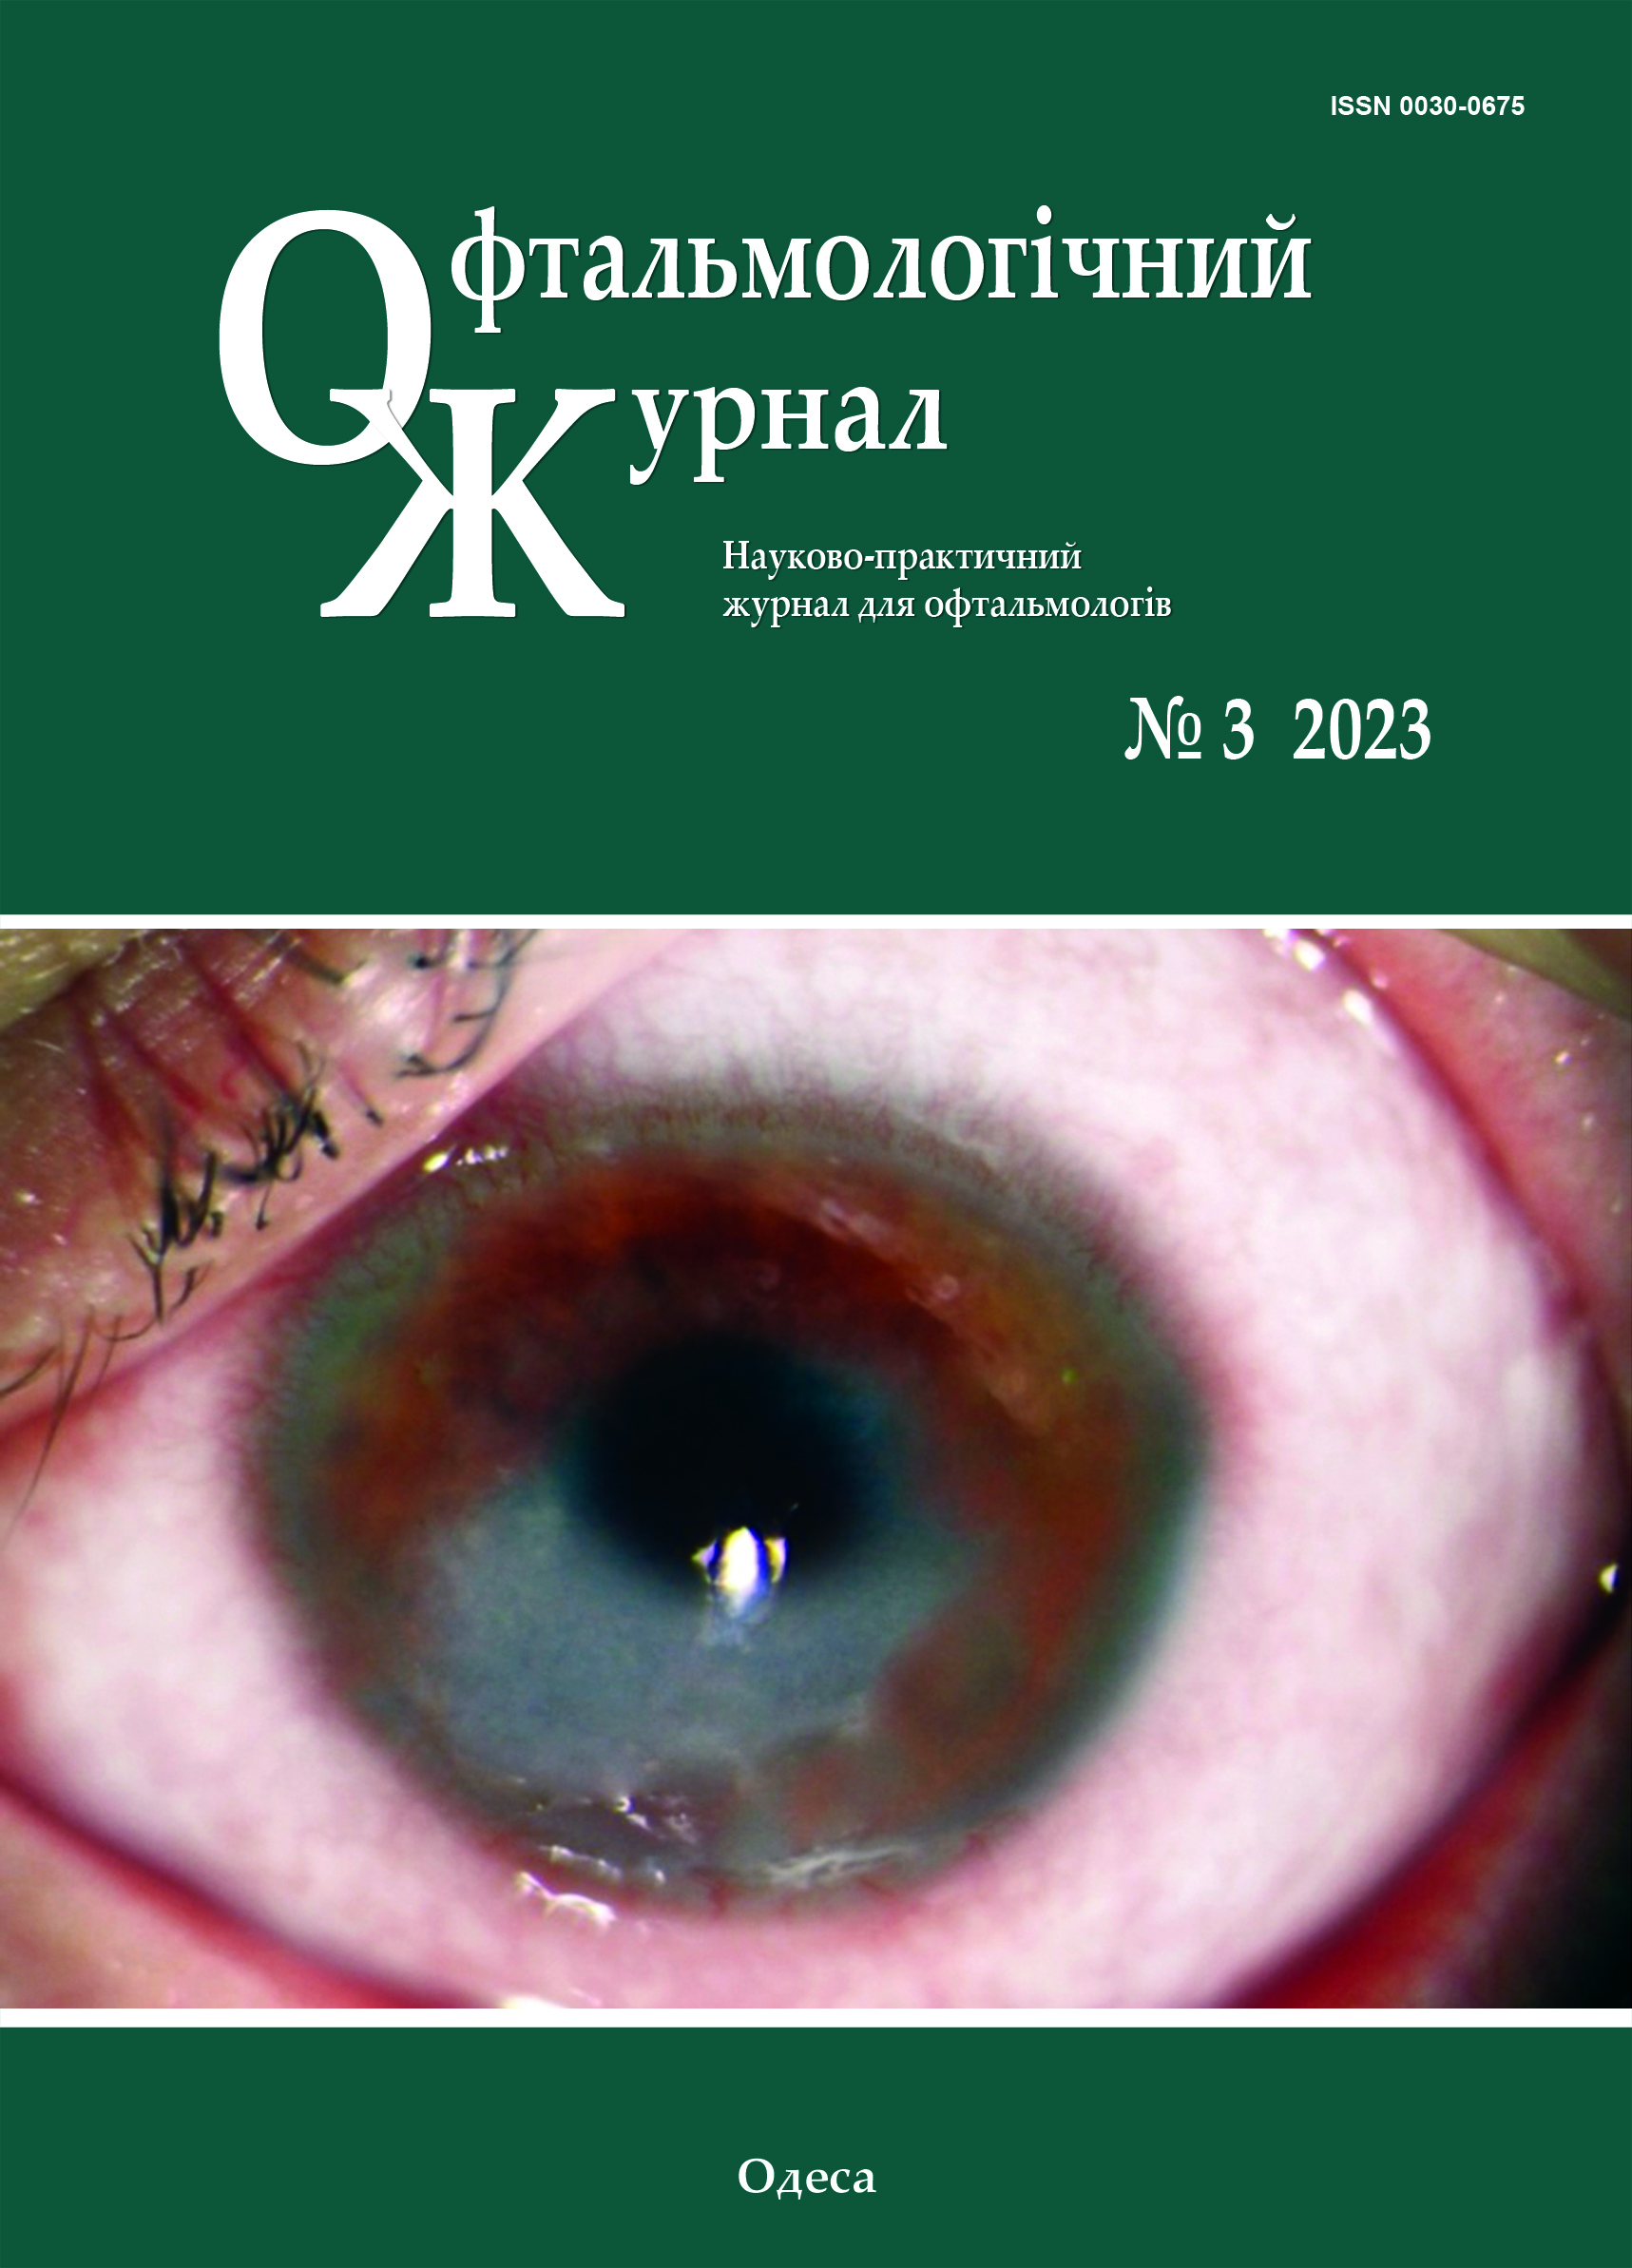 					View No. 3 (2023): Journal of Ophthalmology (Ukraine)
				